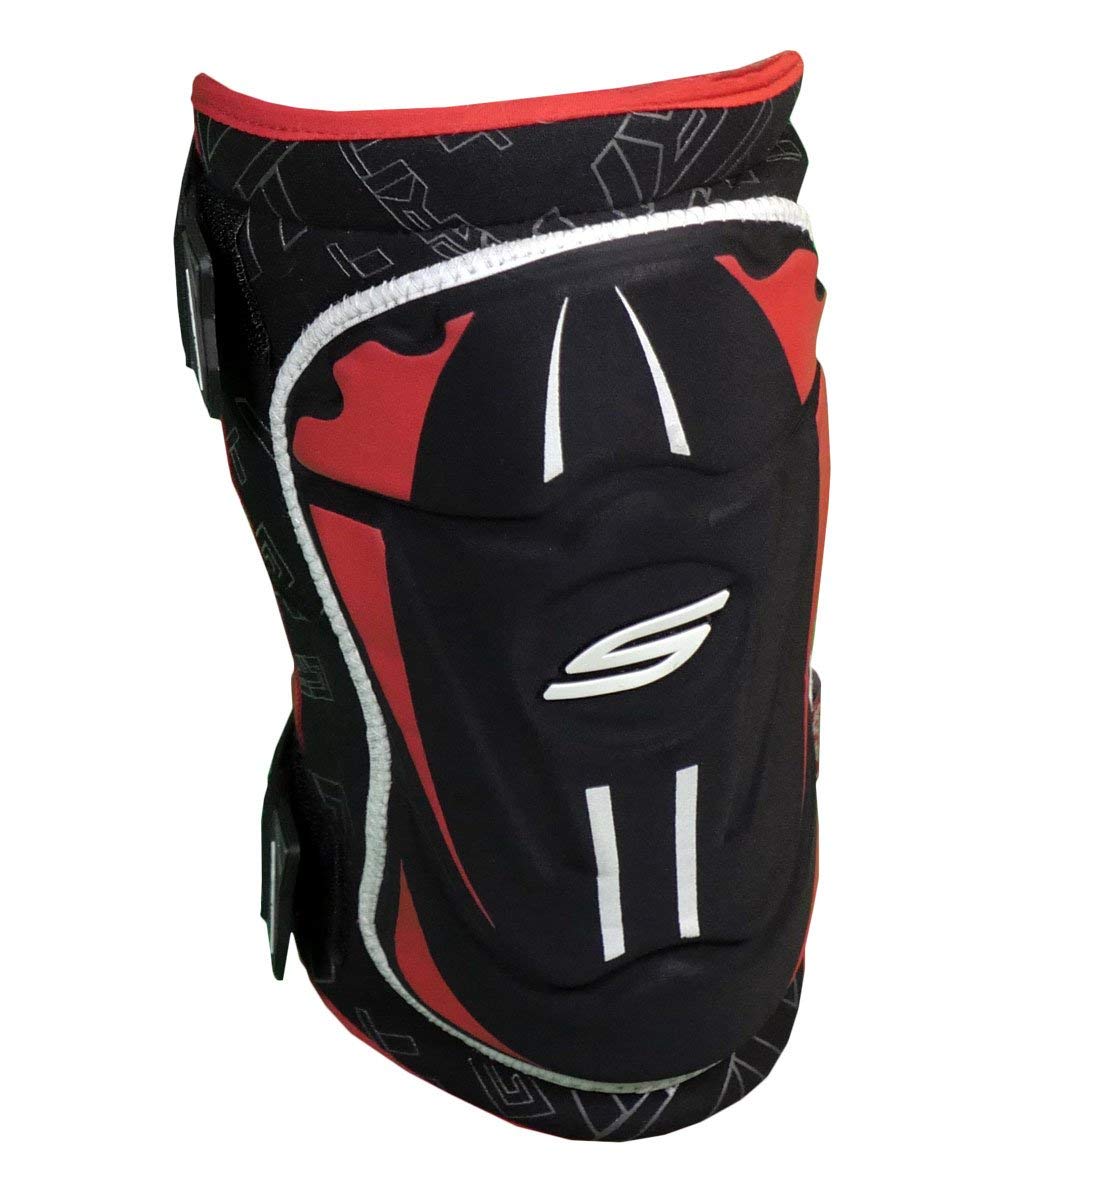 Social Paintball Grit Protective Gear Knee Pads - Black Red - Small - Social Paintball